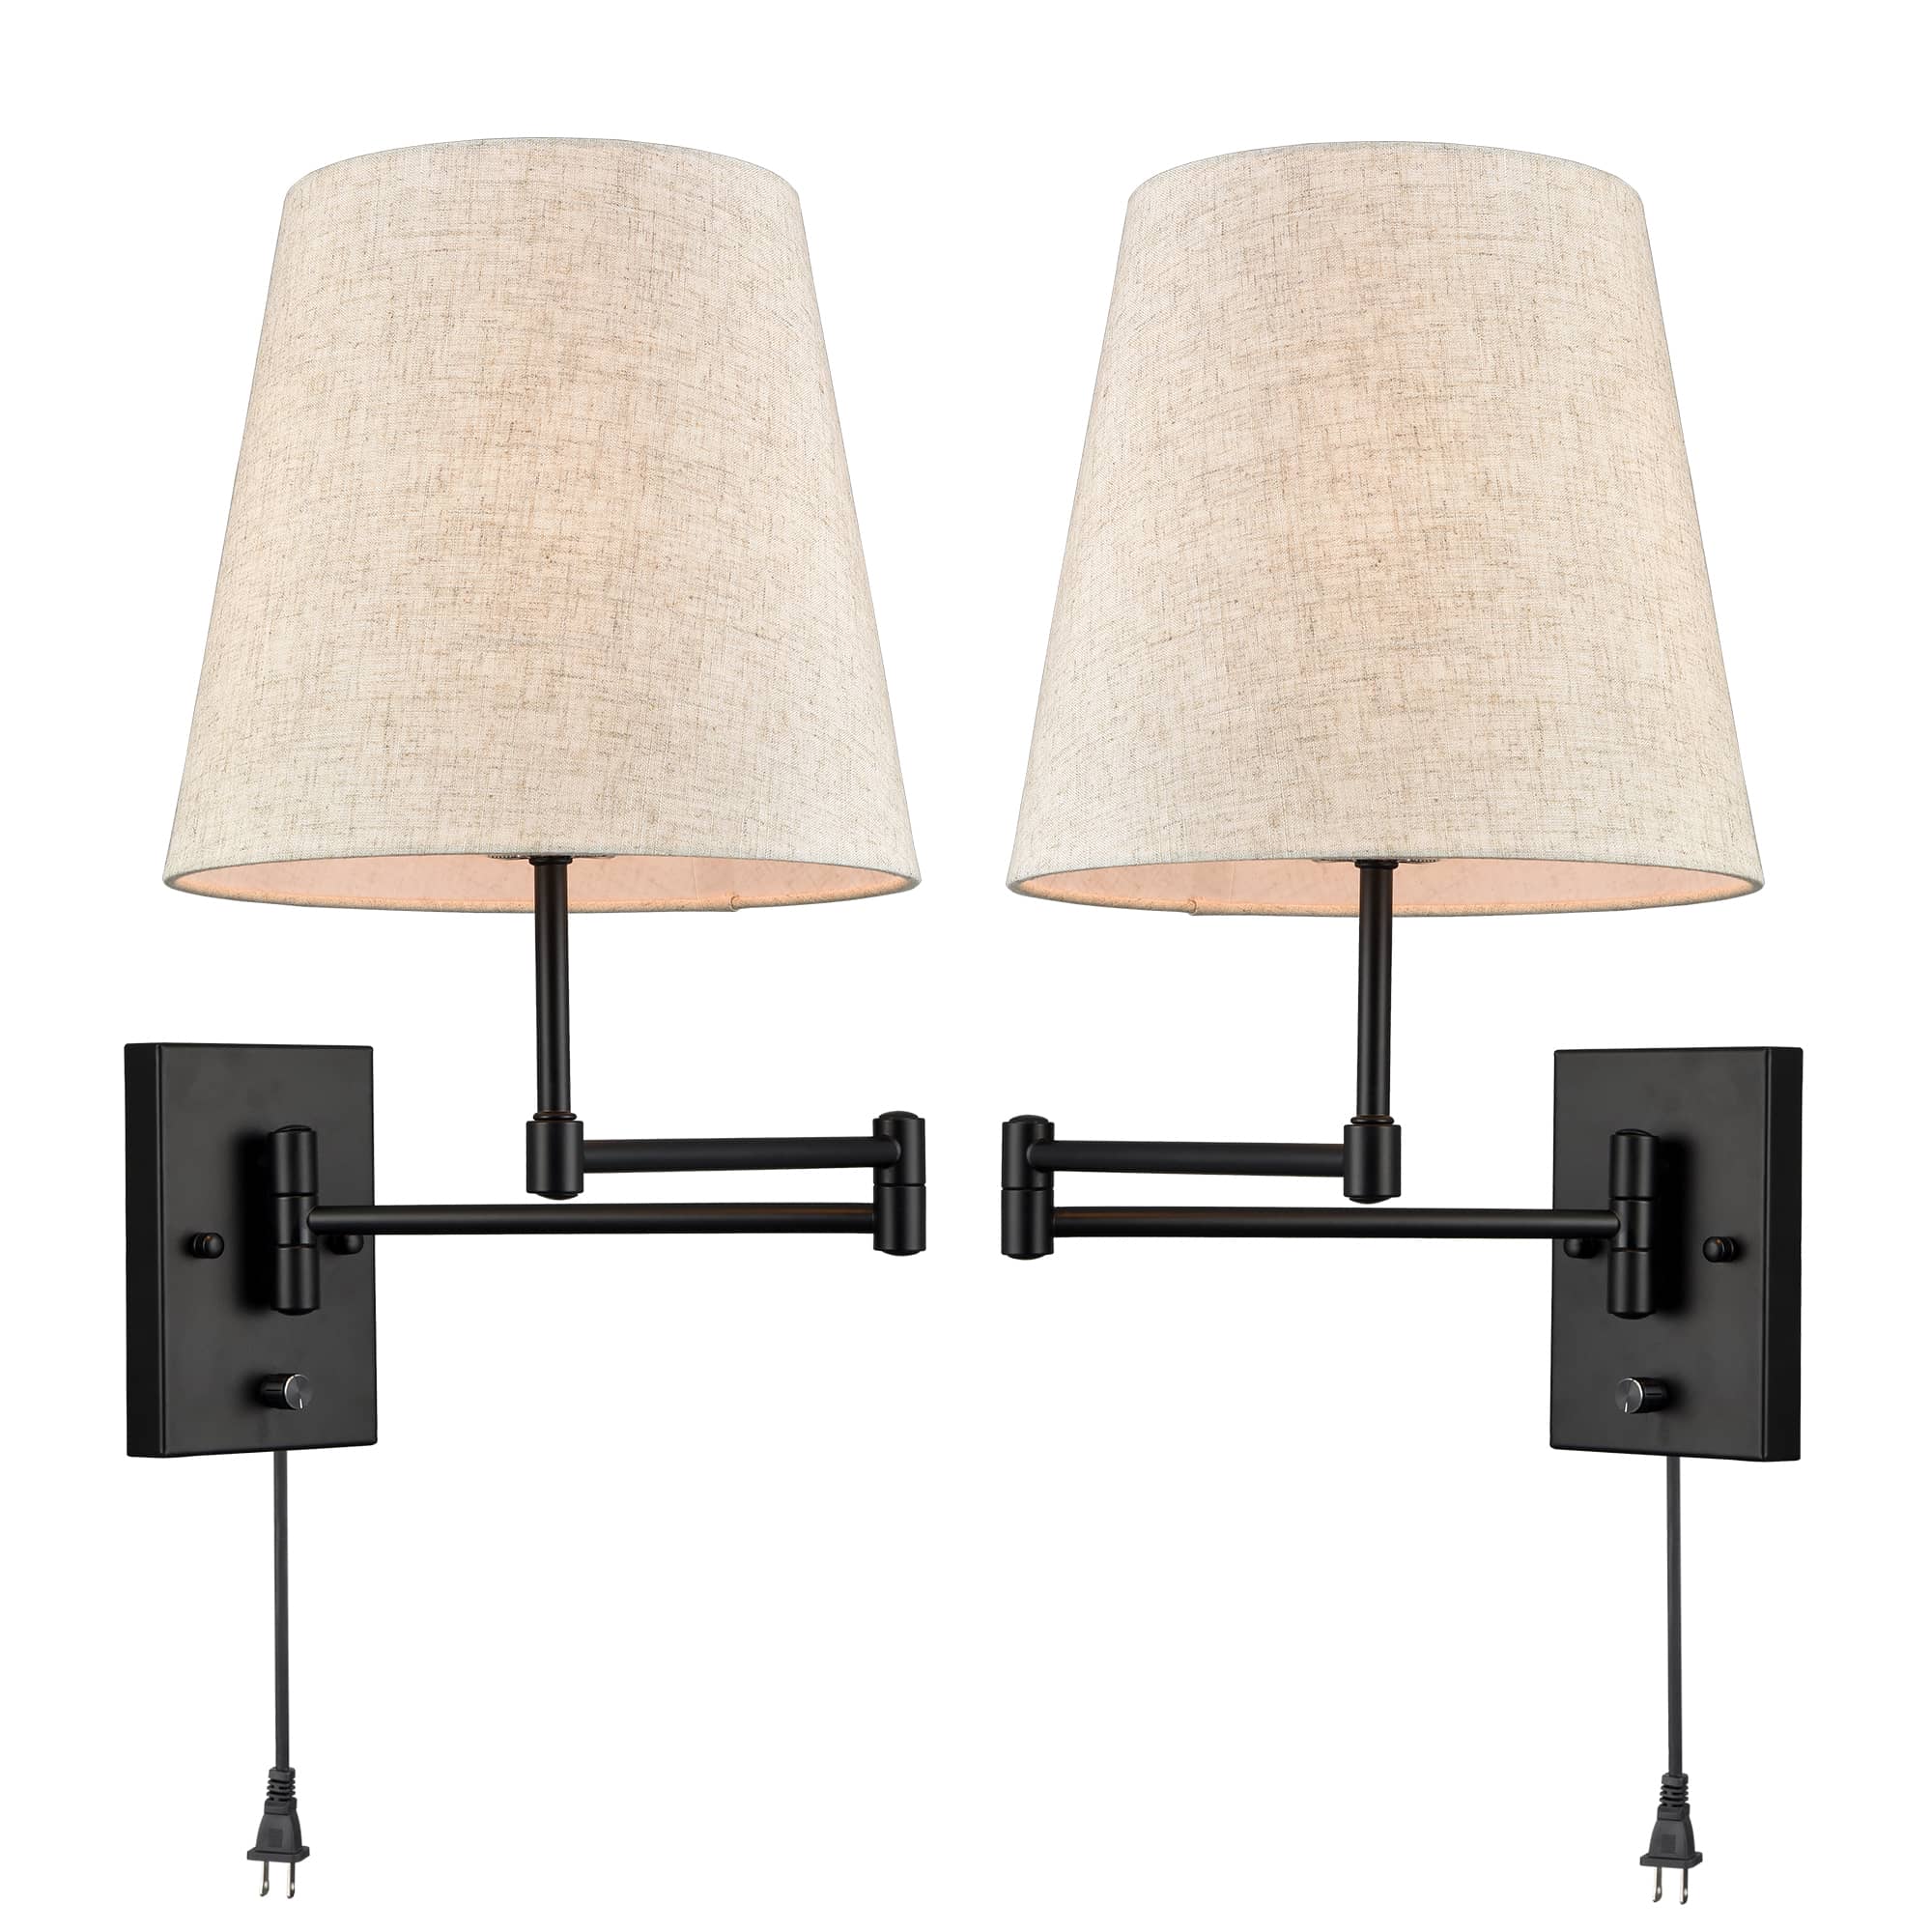 Set of 2 Fabric Shade Swing arm Plug-in or Hardwired Black Wall Lamp